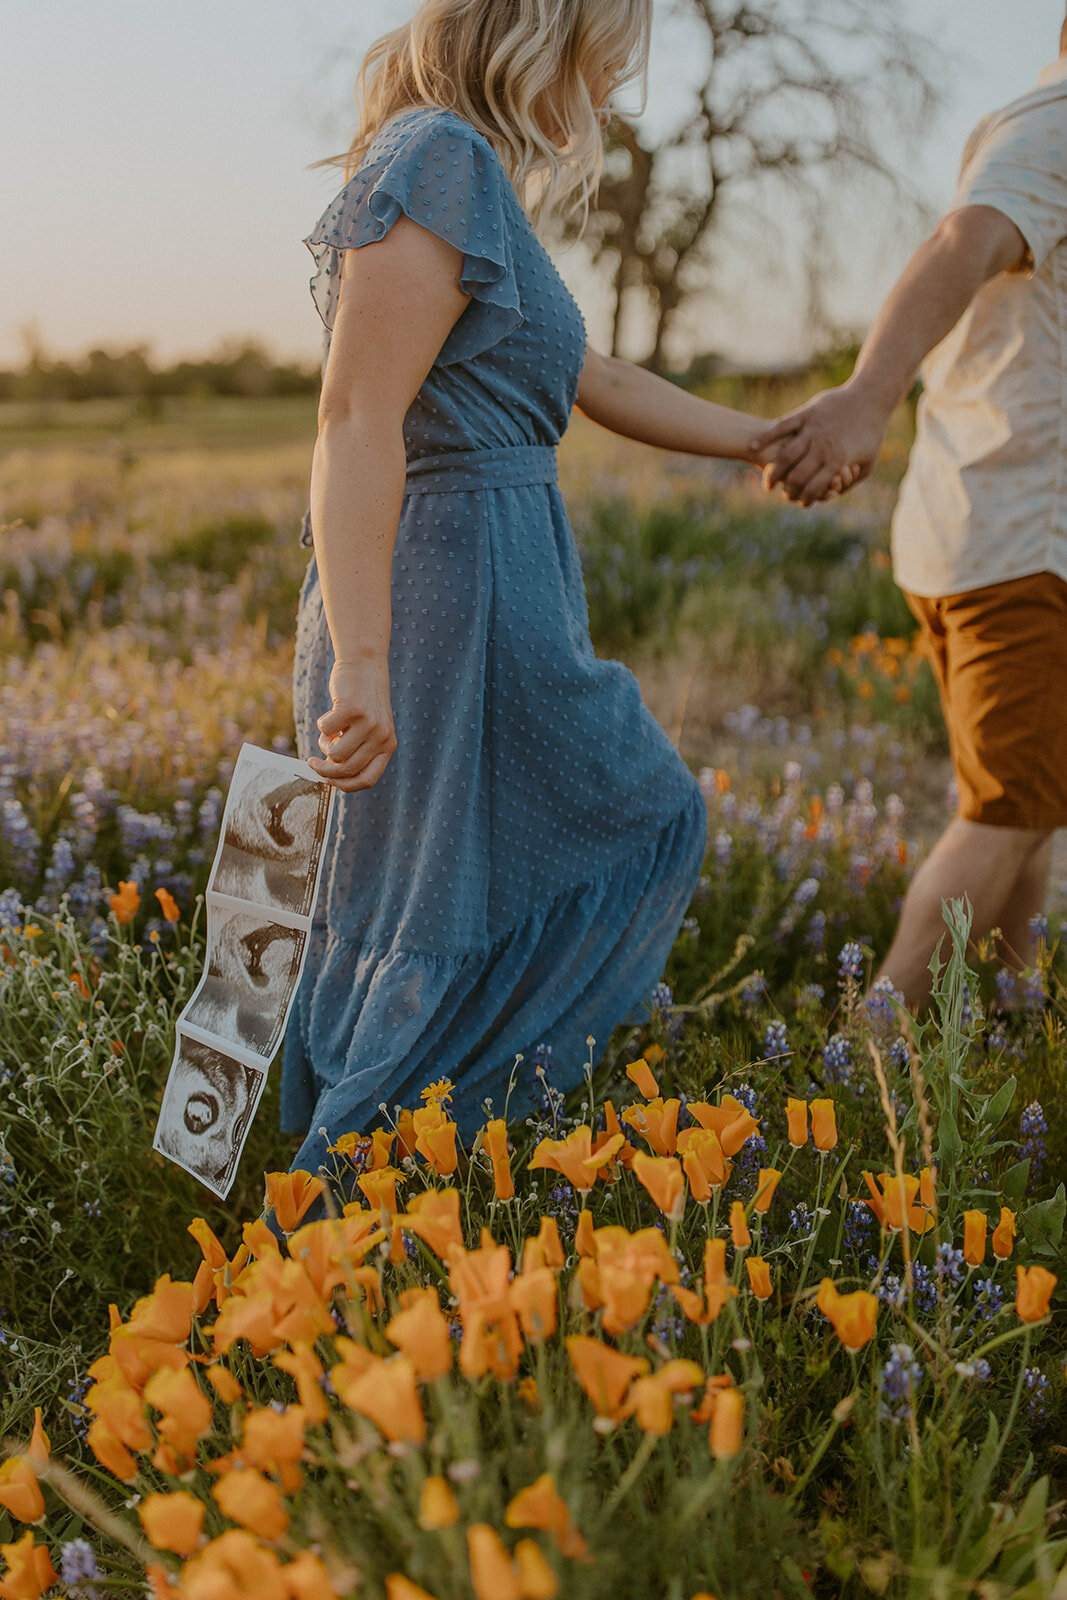 mom to be holds sonogram photo in field of wildflowers